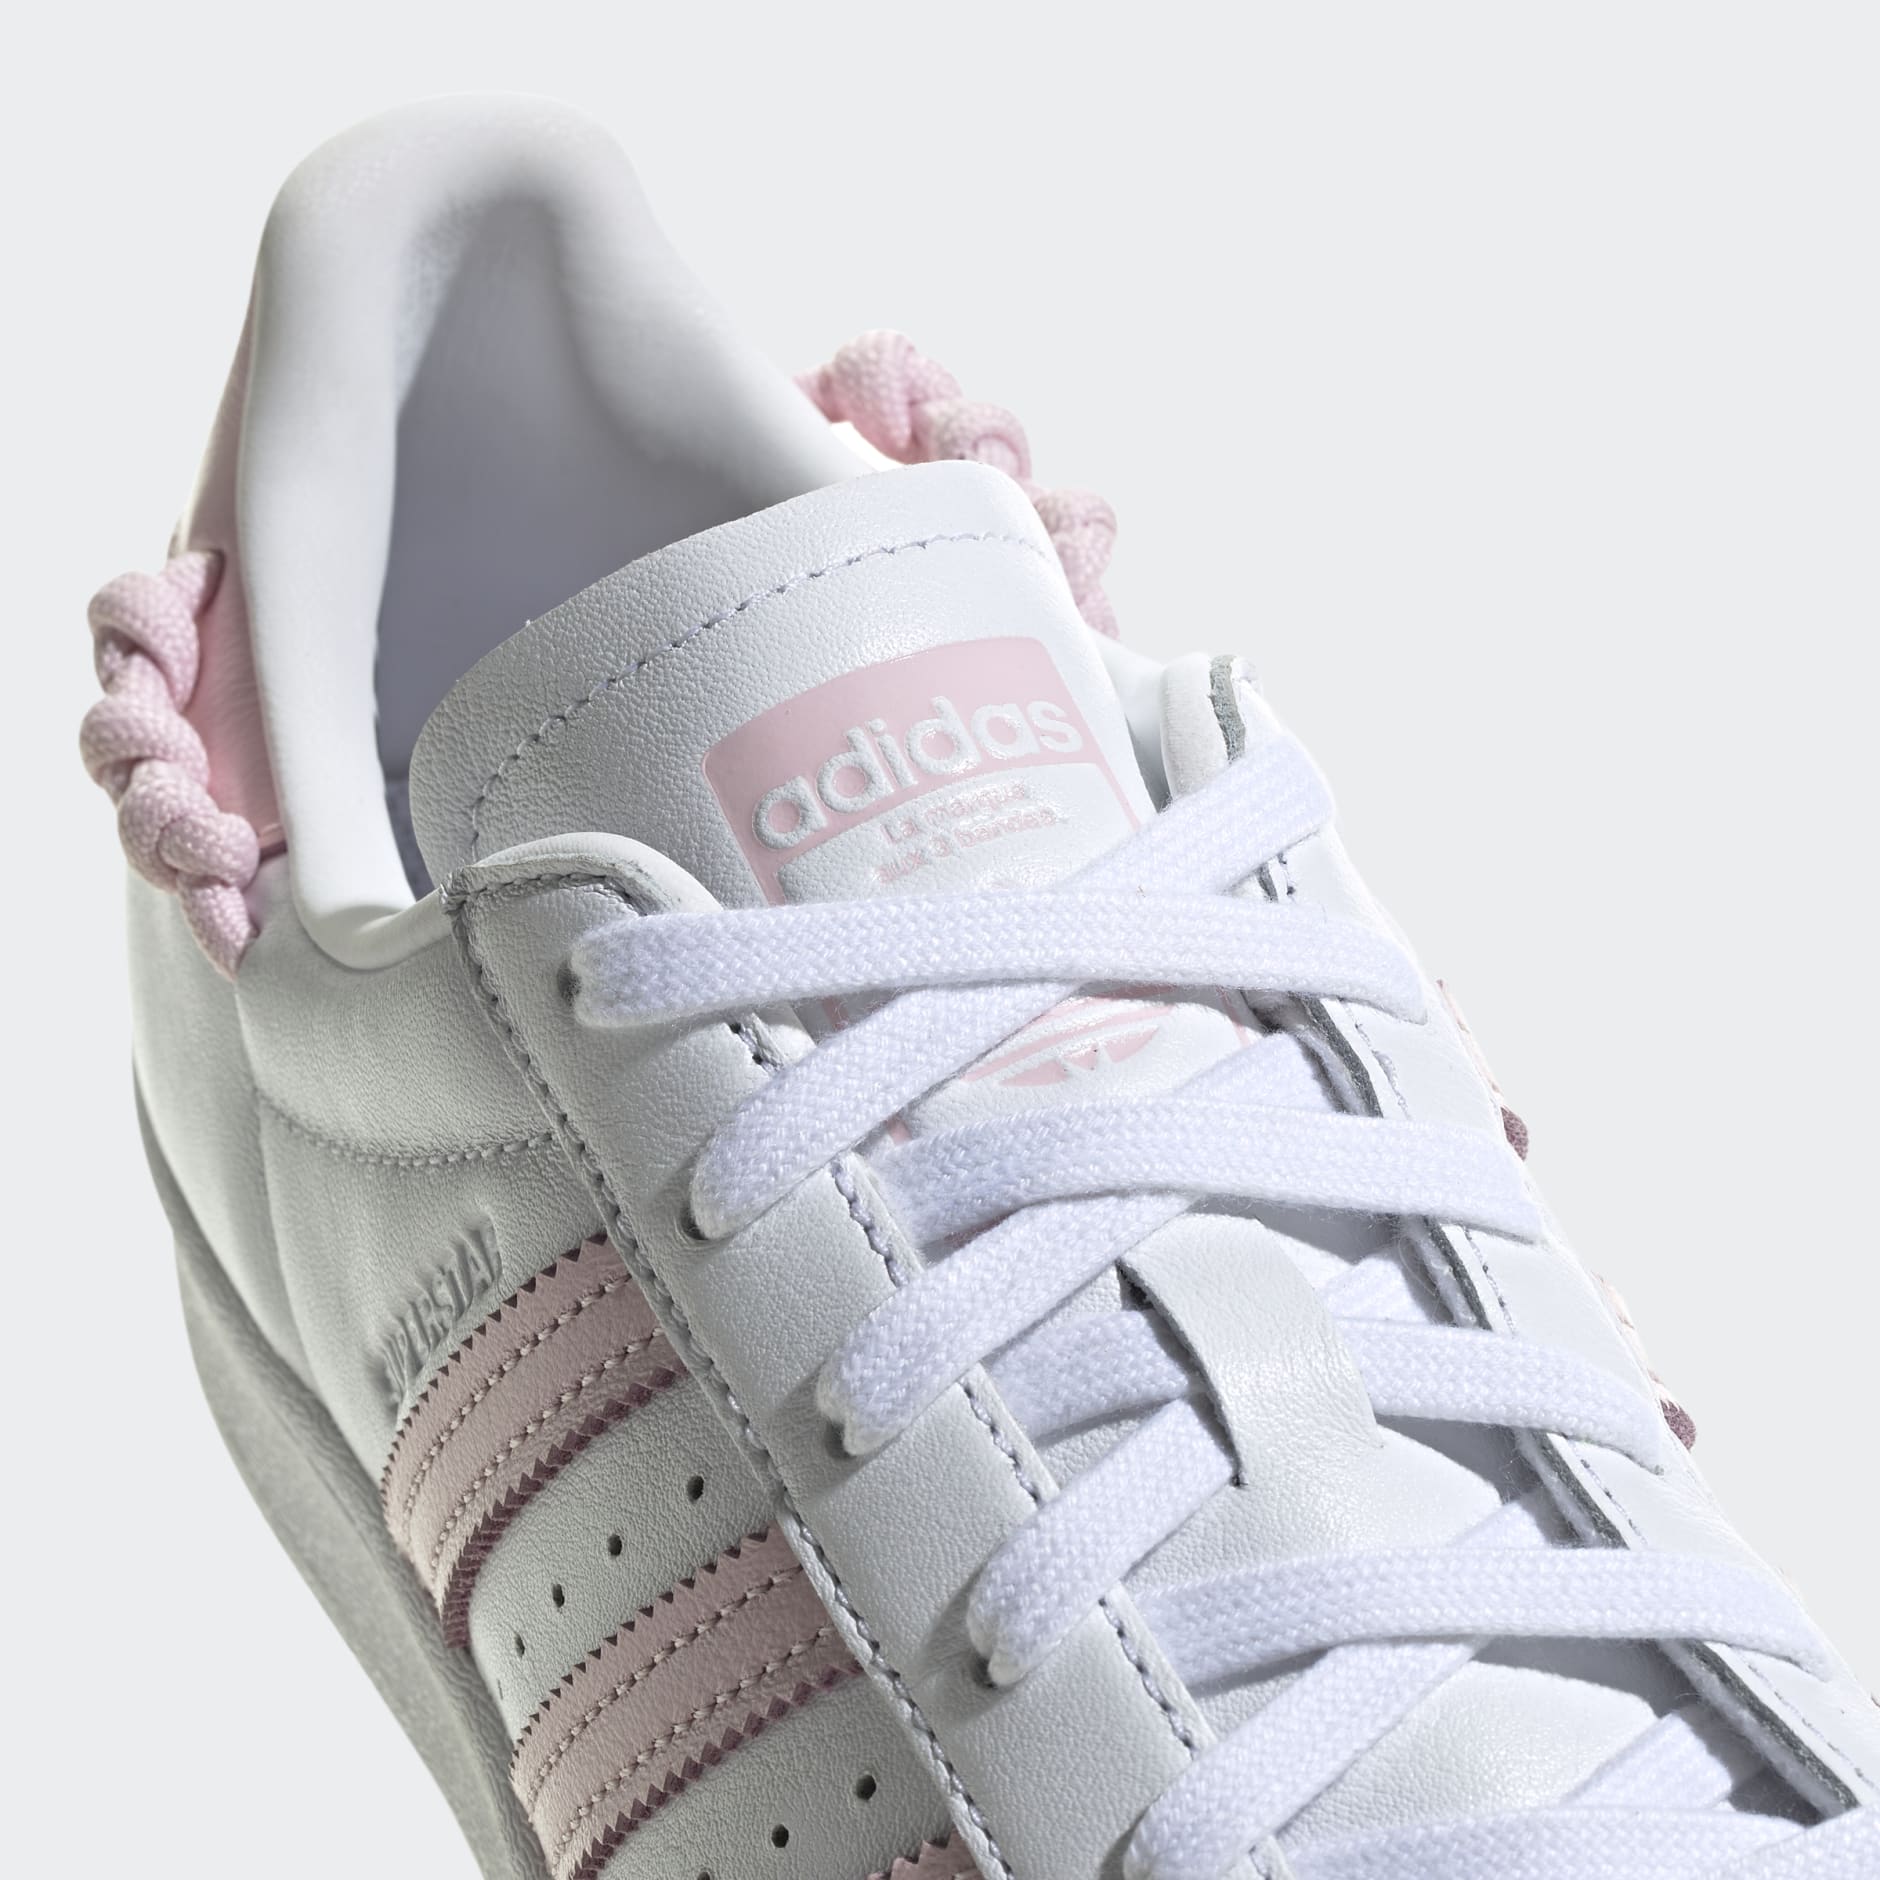 Overflod Seminary excentrisk adidas Superstar Shoes - White | adidas IL